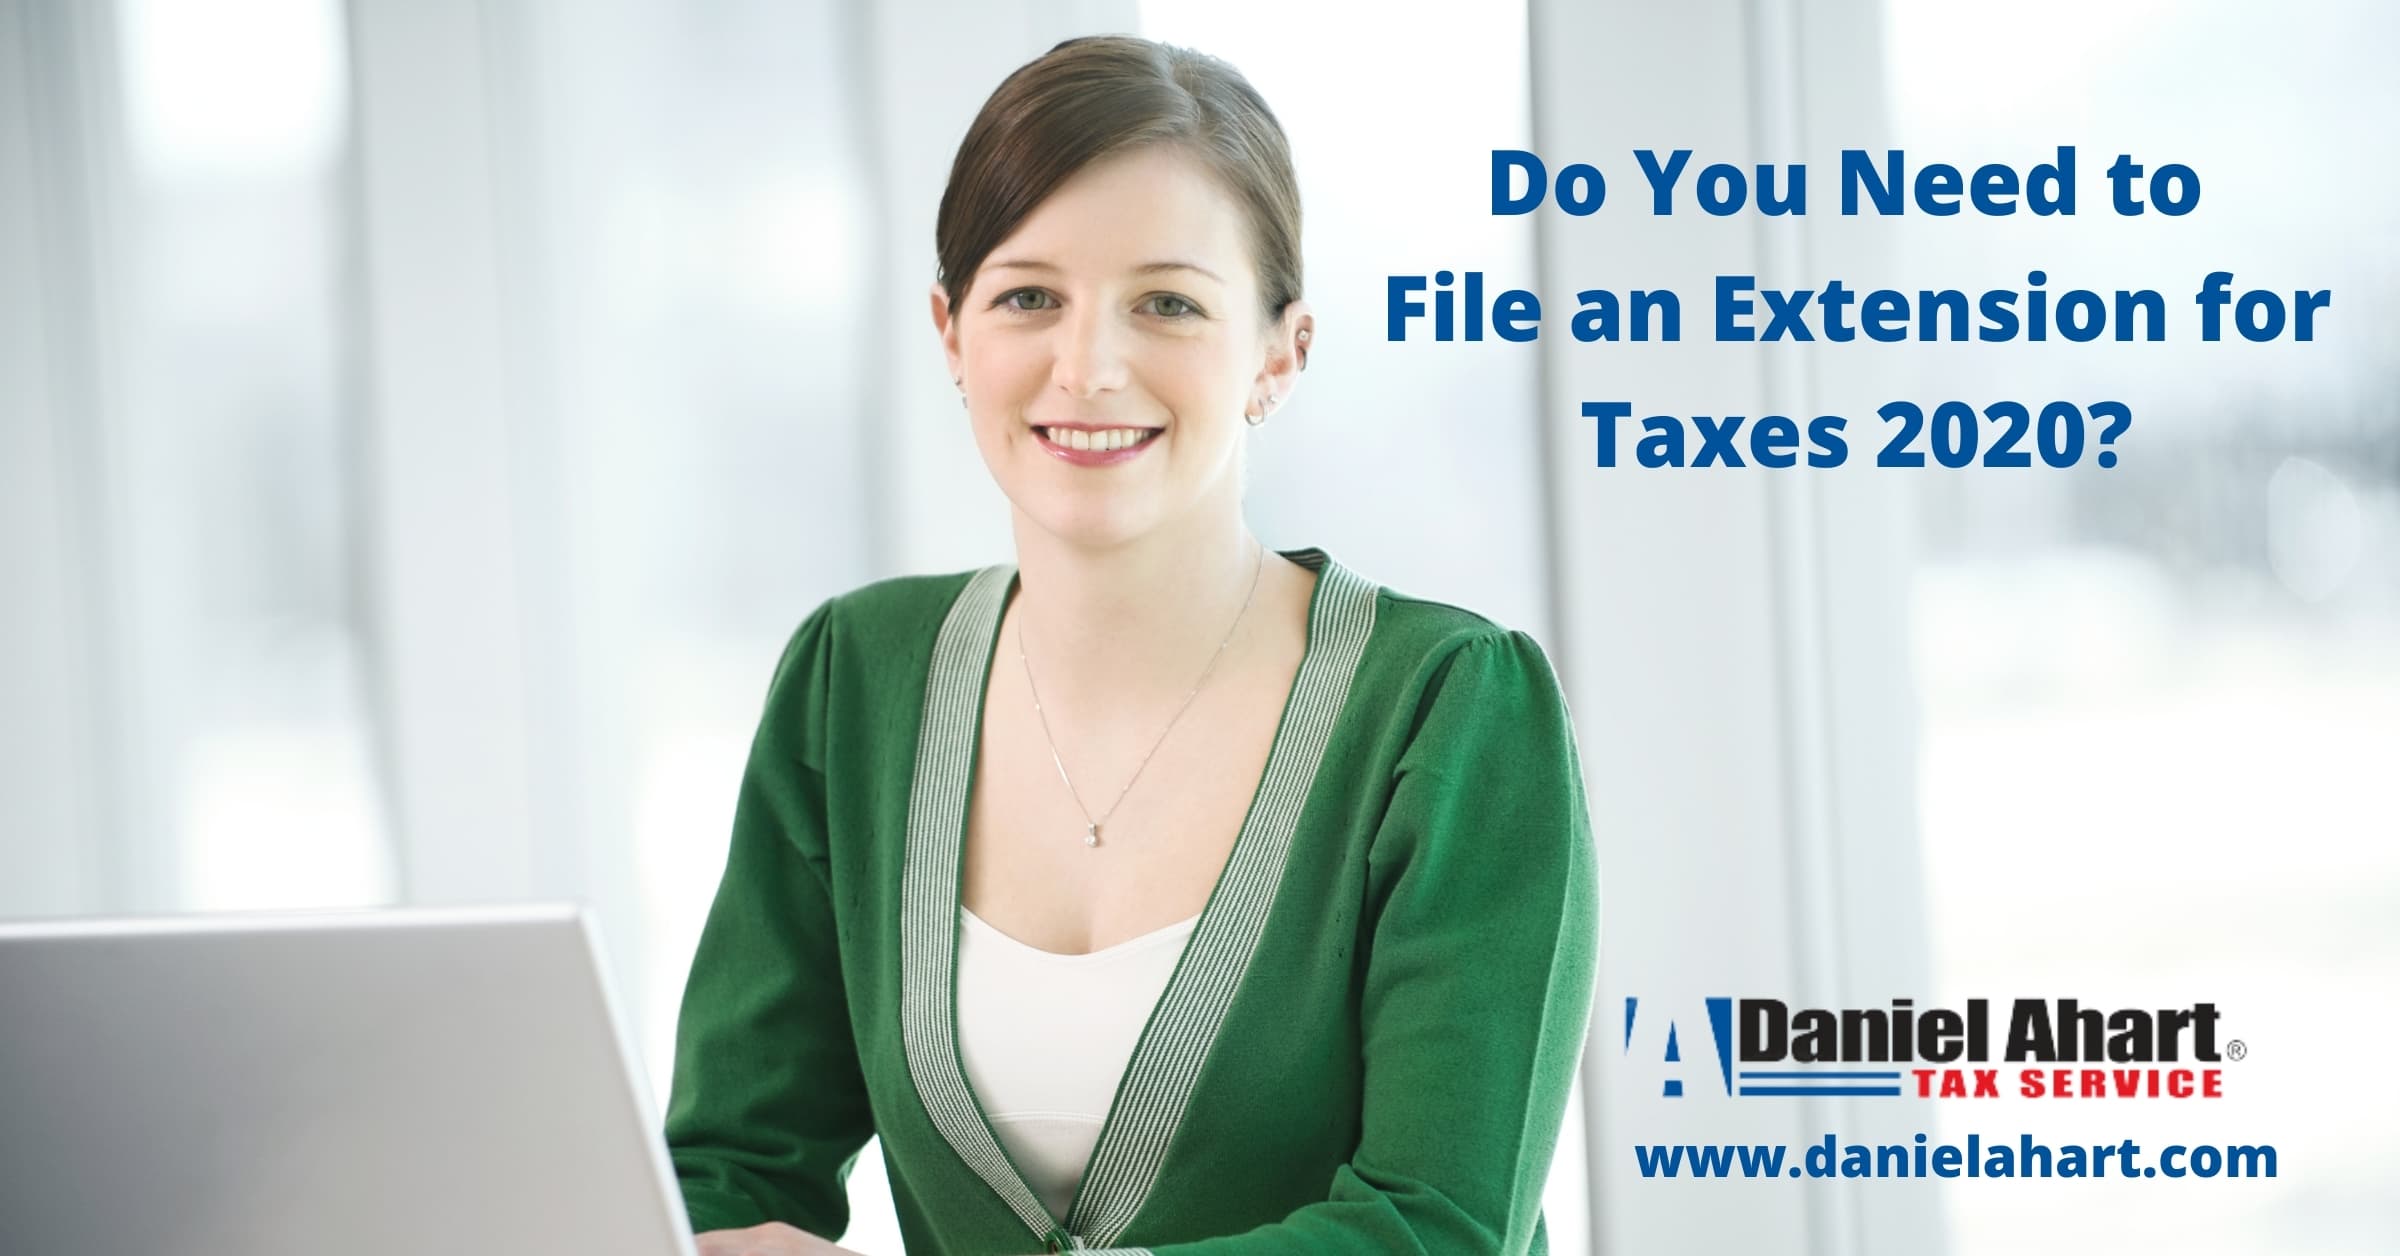 Filing a Tax Extension with Daniel Ahart Tax Service® by May 17, 2021